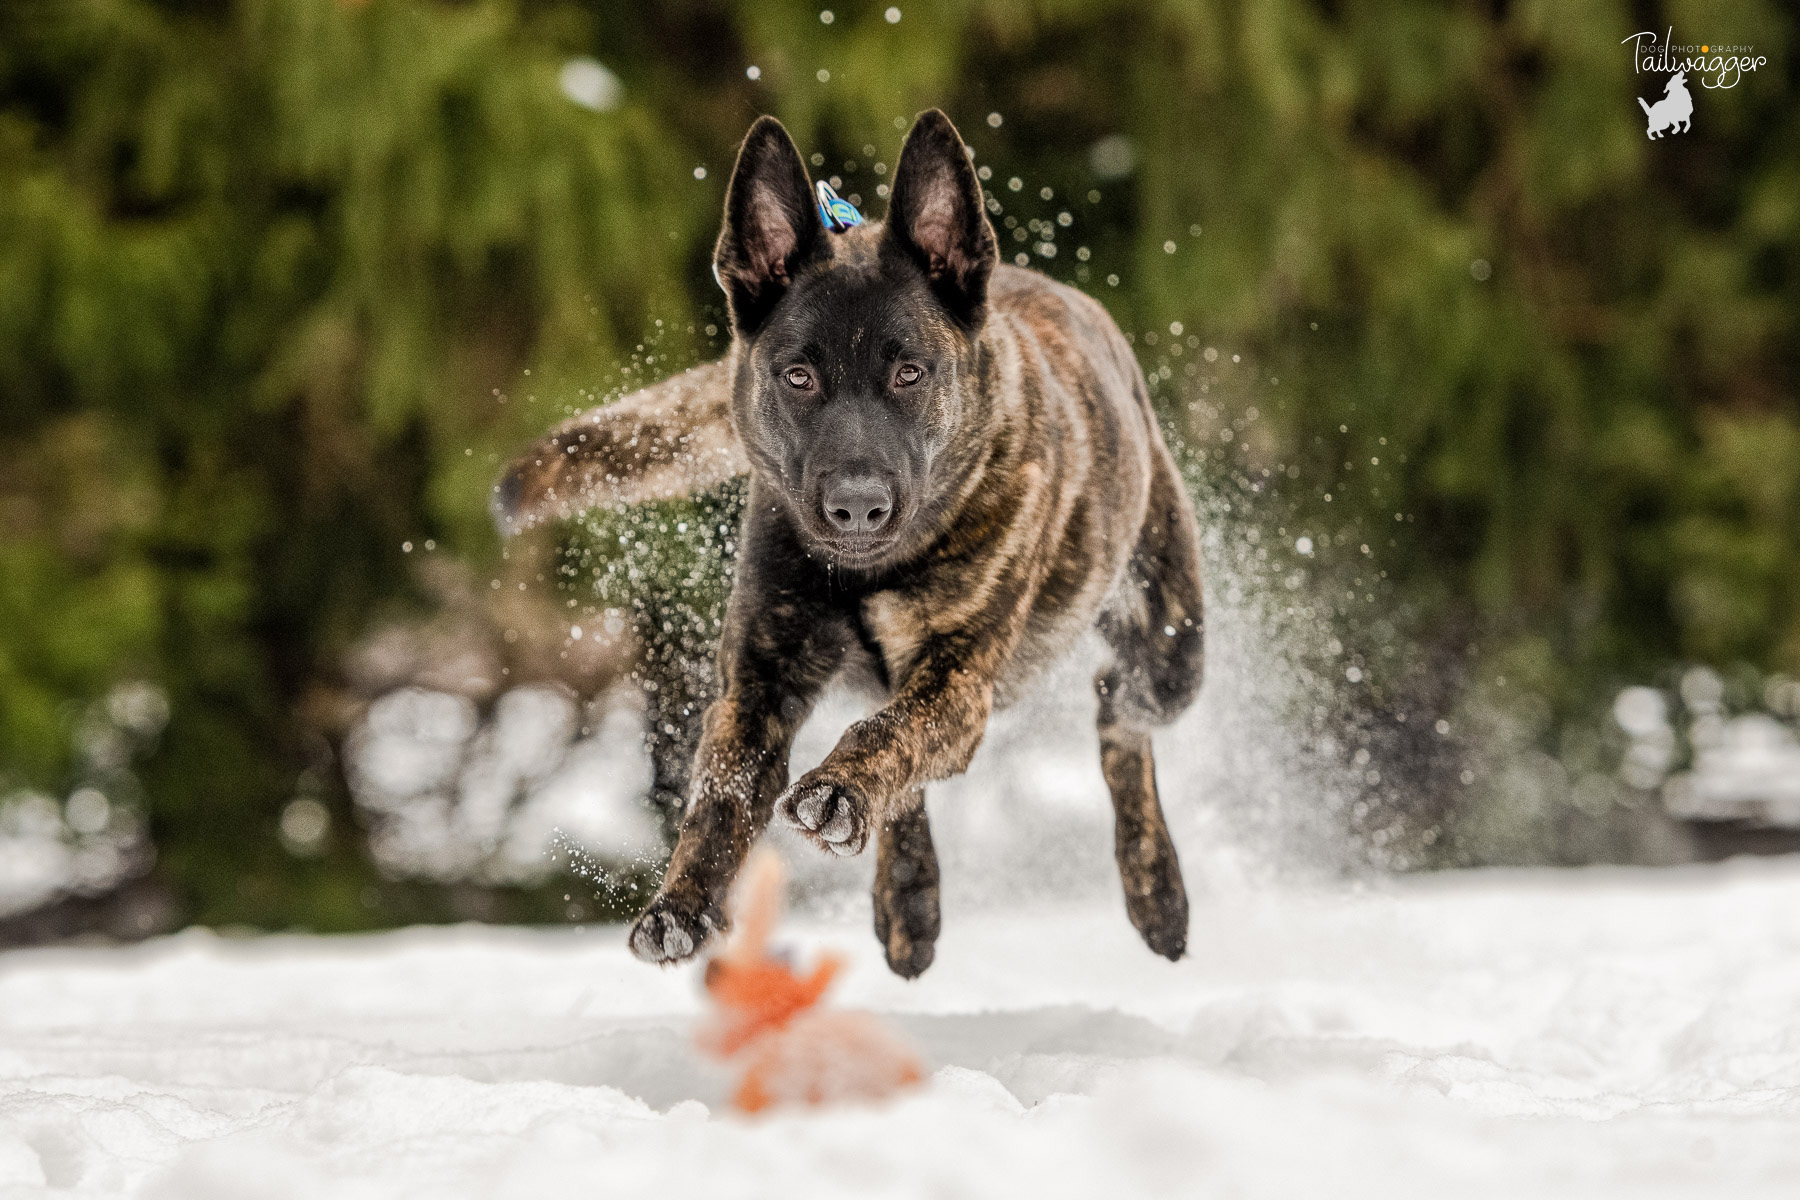 A Dutch Shepherd puppy is caught mid-air while chasing his toy in the snow.